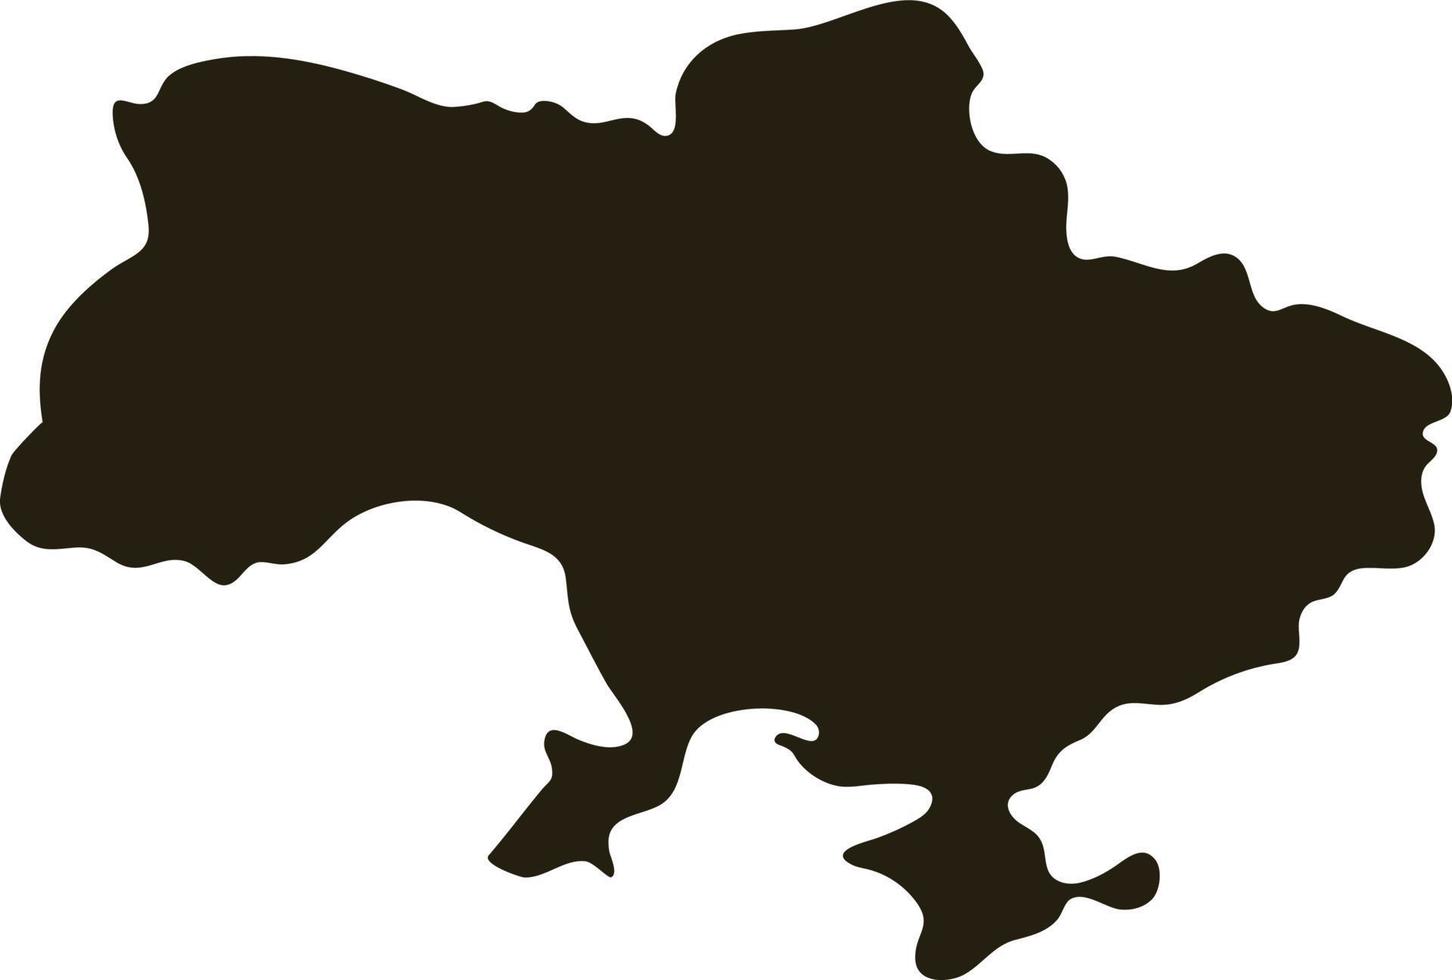 Map of Ukraine. Solid simple silhouette map vector illustration